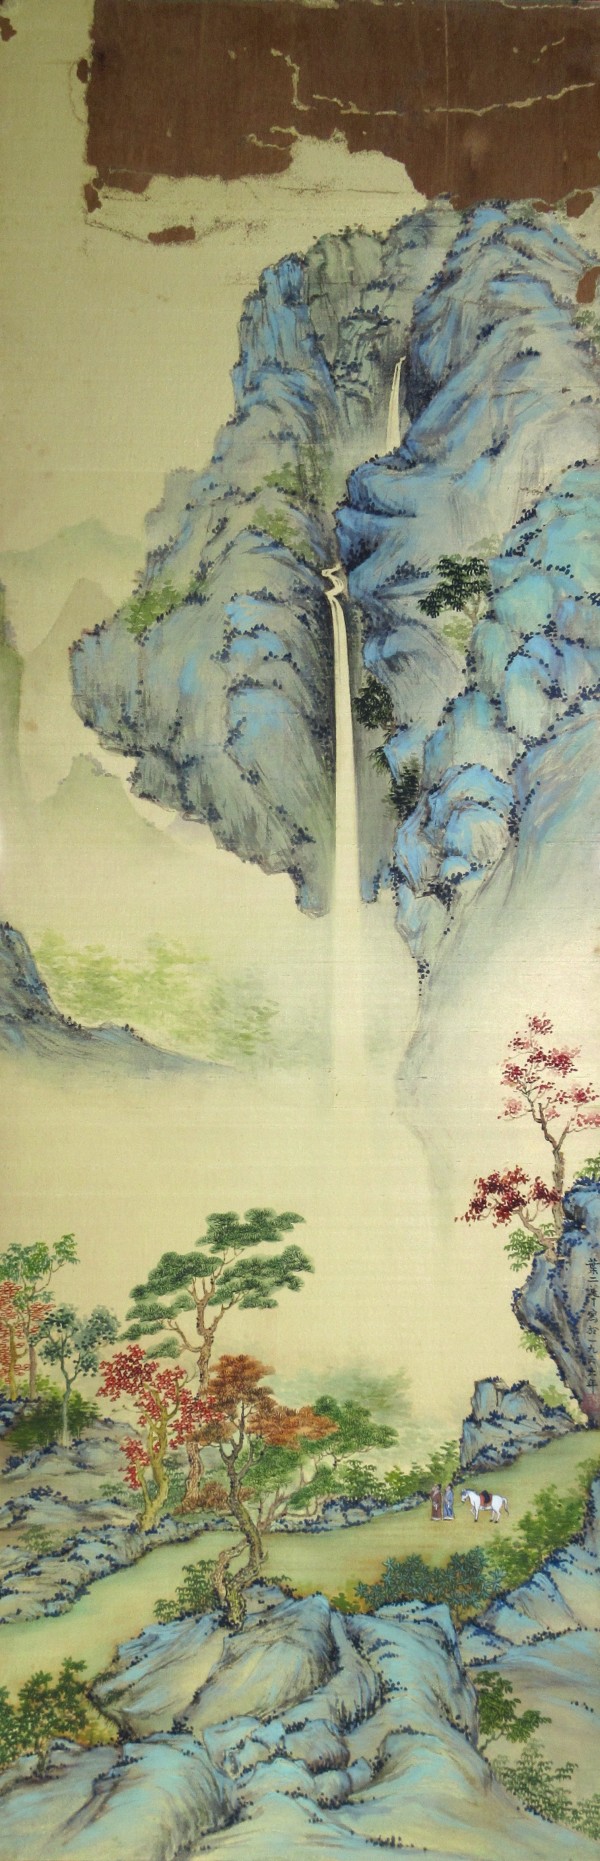 Landscape Panel 4 of 4 by Yee Wah Jung Attributed